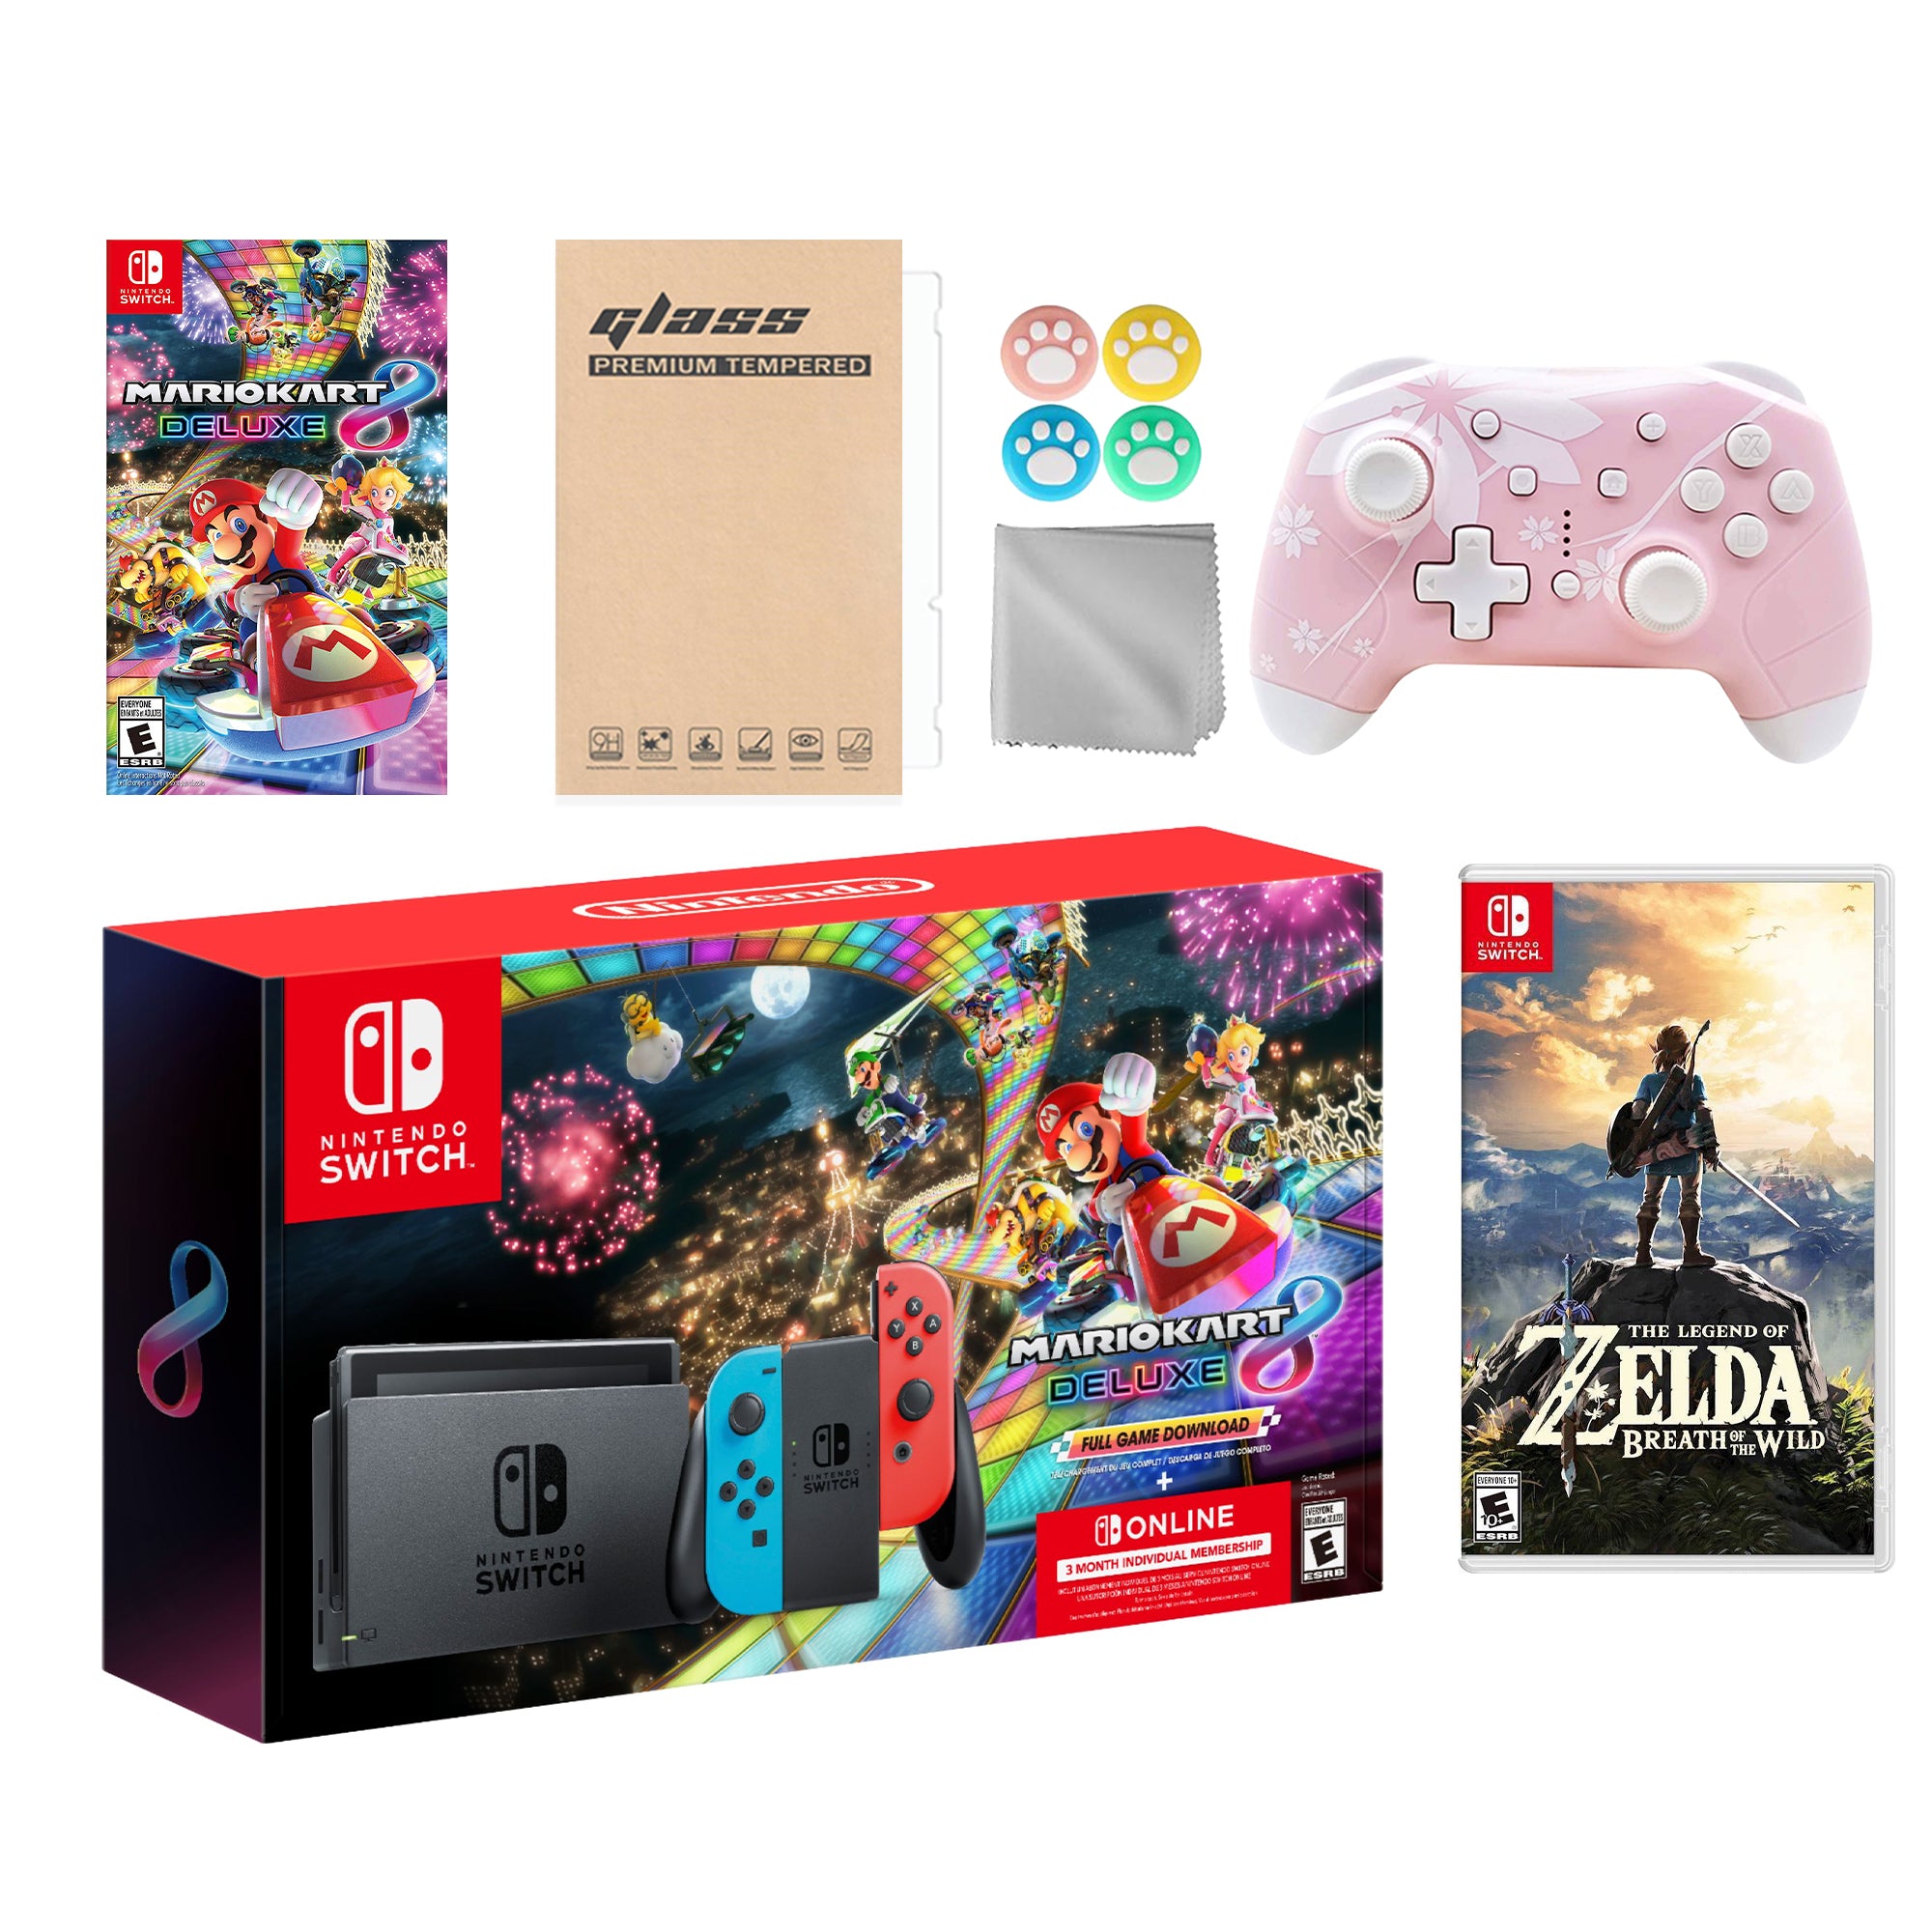 Nintendo Switch Mario Kart 8 Deluxe Bundle: Red Blue Console, Mario Kart 8 & Membership, The Legend of Zelda: Breath of the Wild, Mytrix Wireless Pro Controller Pink Cherry Blossom and Accessories